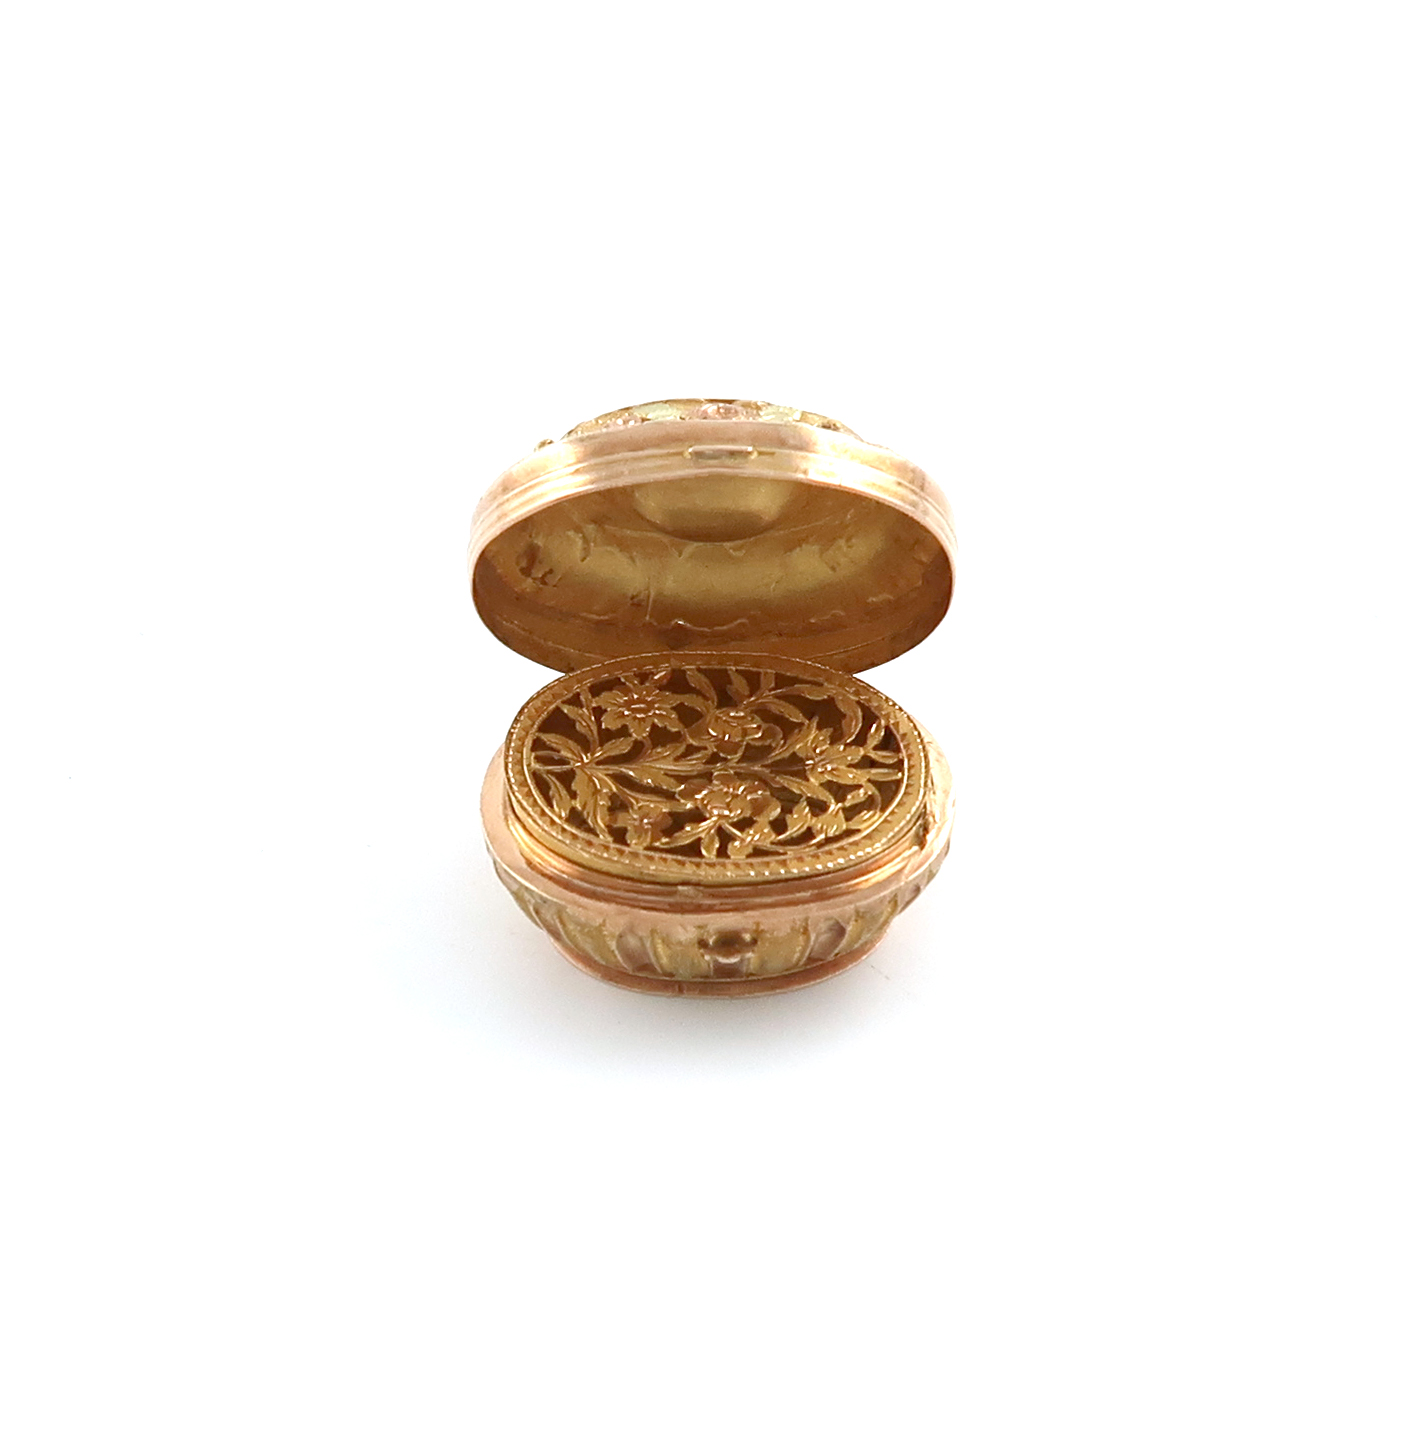 A 19th century French gold vinaigrette, marked with a French control mark, oval form, part-fluted - Image 2 of 2